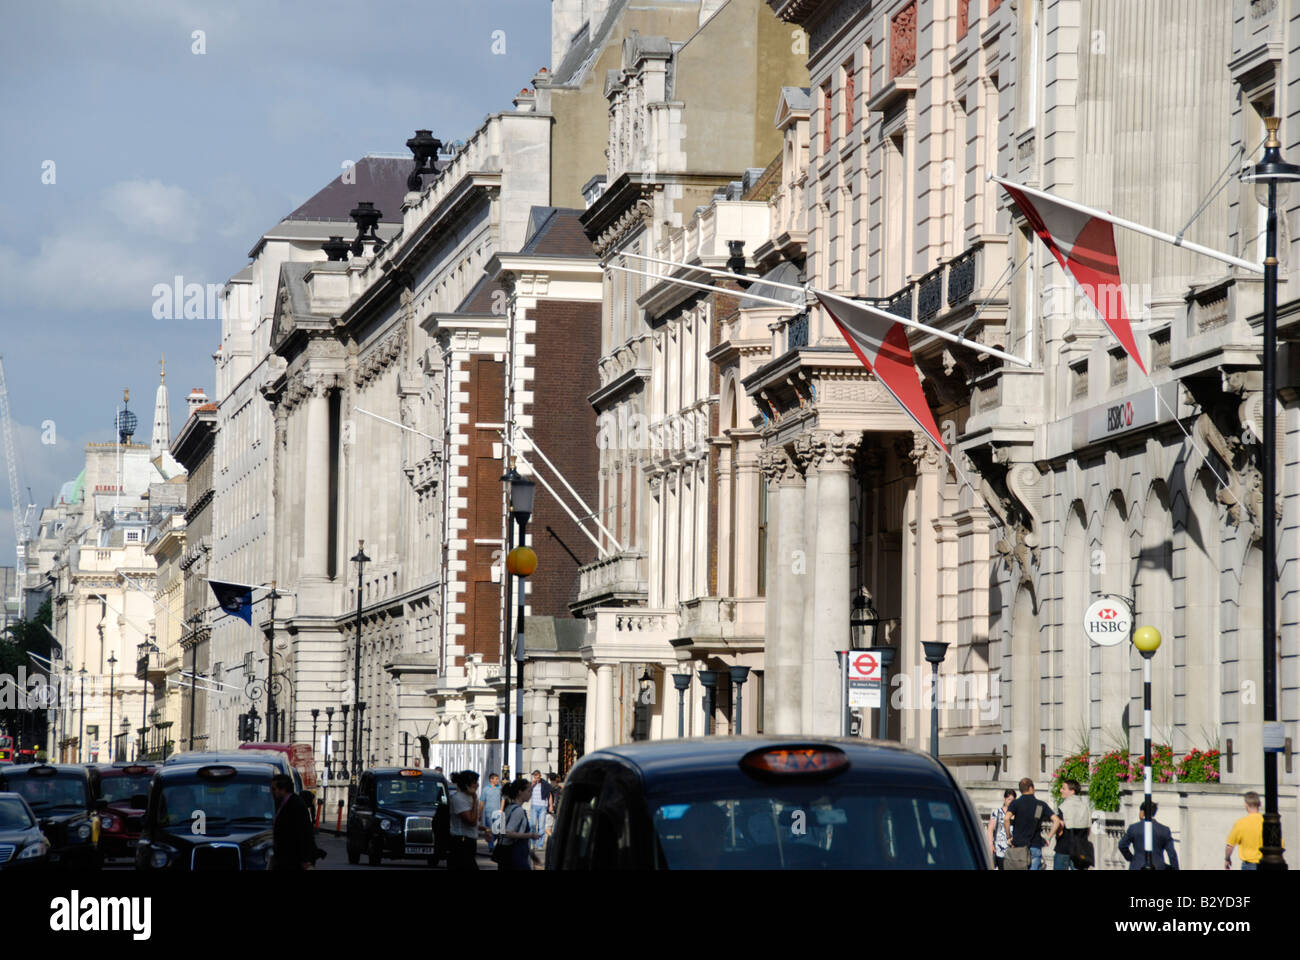 View along Pall Mall with passing black taxi cabs St James s London England Stock Photo